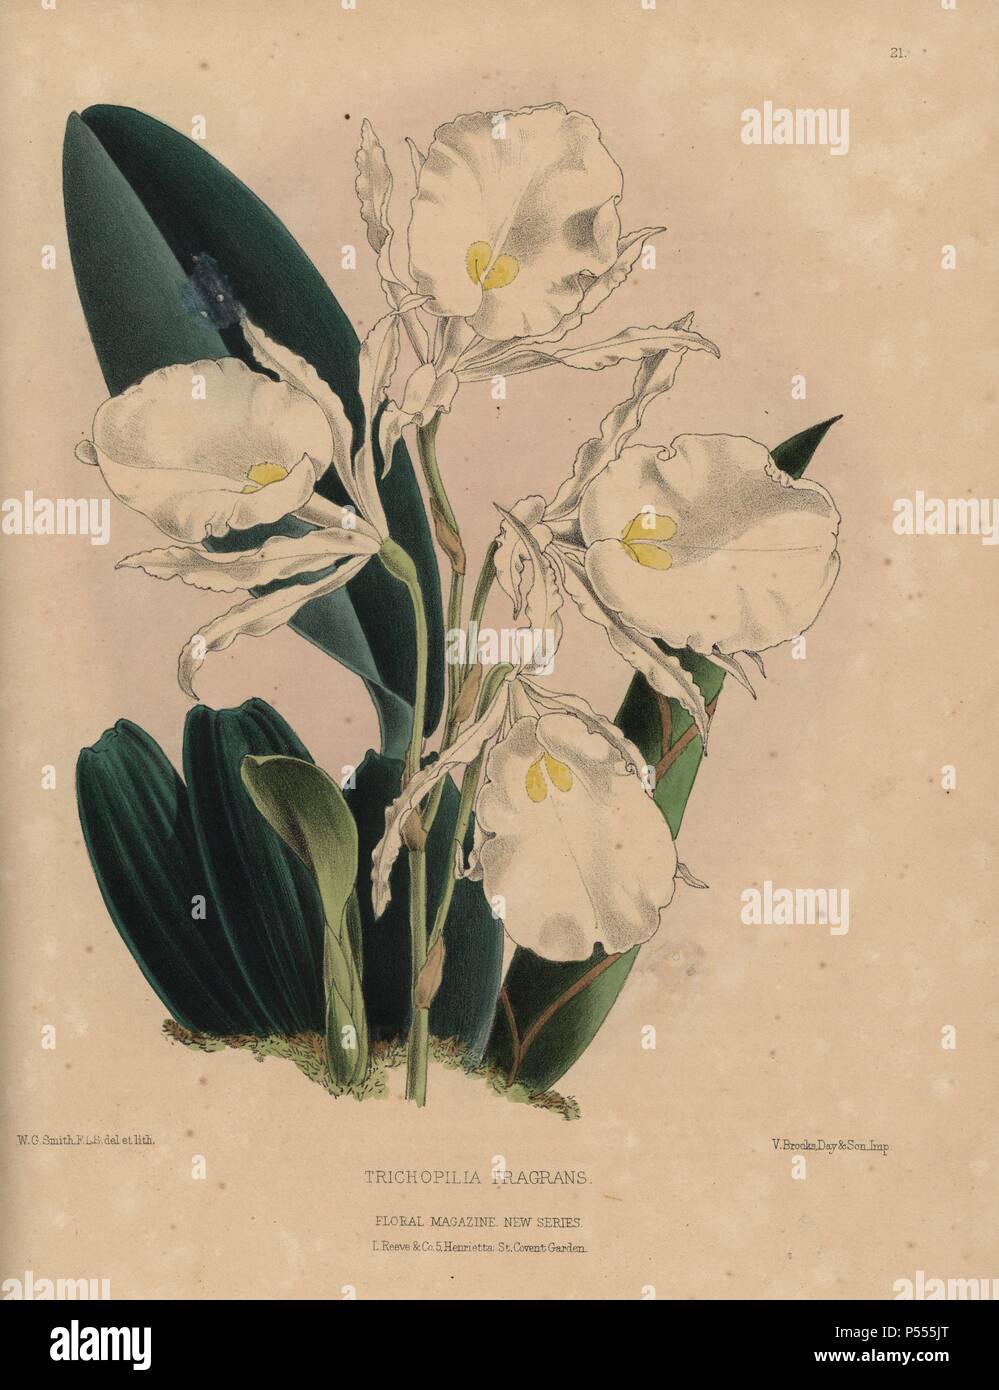 Fragrant Trichopilia orchid with white and yellow flowers. Trichopilia fragrans. Handcolored botanical drawn and lithographed by W.G. Smith from H.H. Dombrain's 'Floral Magazine' 1872.. Worthington G. Smith (1835-1917), architect, engraver and mycologist. Smith also illustrated 'The Gardener's Chronicle.' Henry Honywood Dombrain (1818-1905), clergyman gardener, was editor of the 'Floral Magazine' from 1862 to 1873. Stock Photo